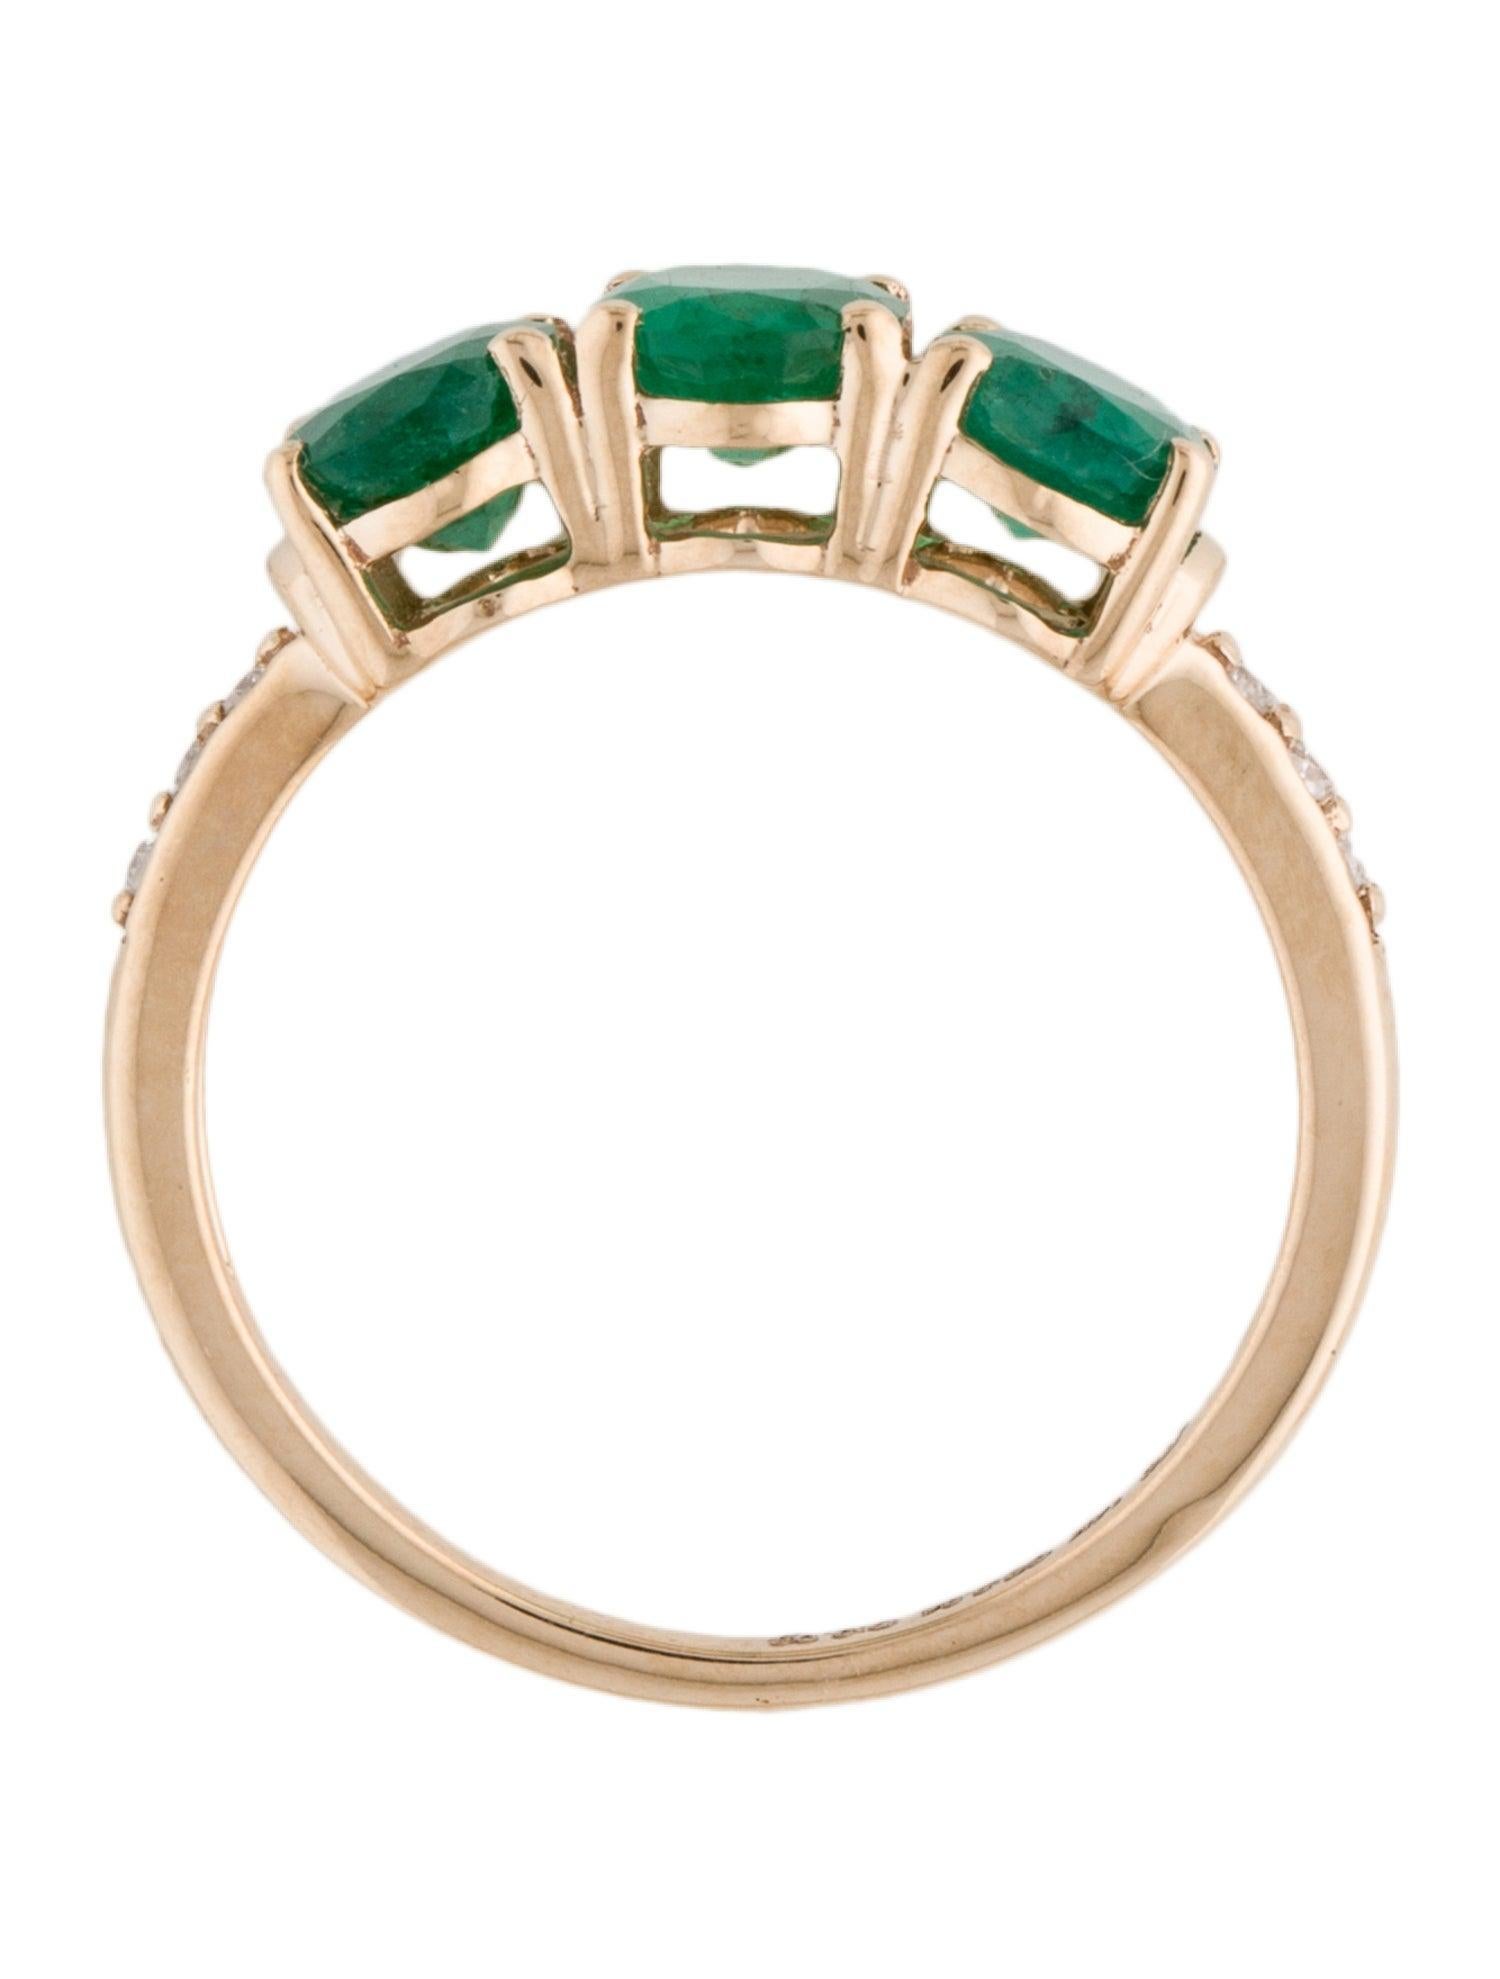 Stunning 14K Emerald & Diamond Band Ring 2.10ctw - Size 6.75 - Timeless Luxury In New Condition For Sale In Holtsville, NY